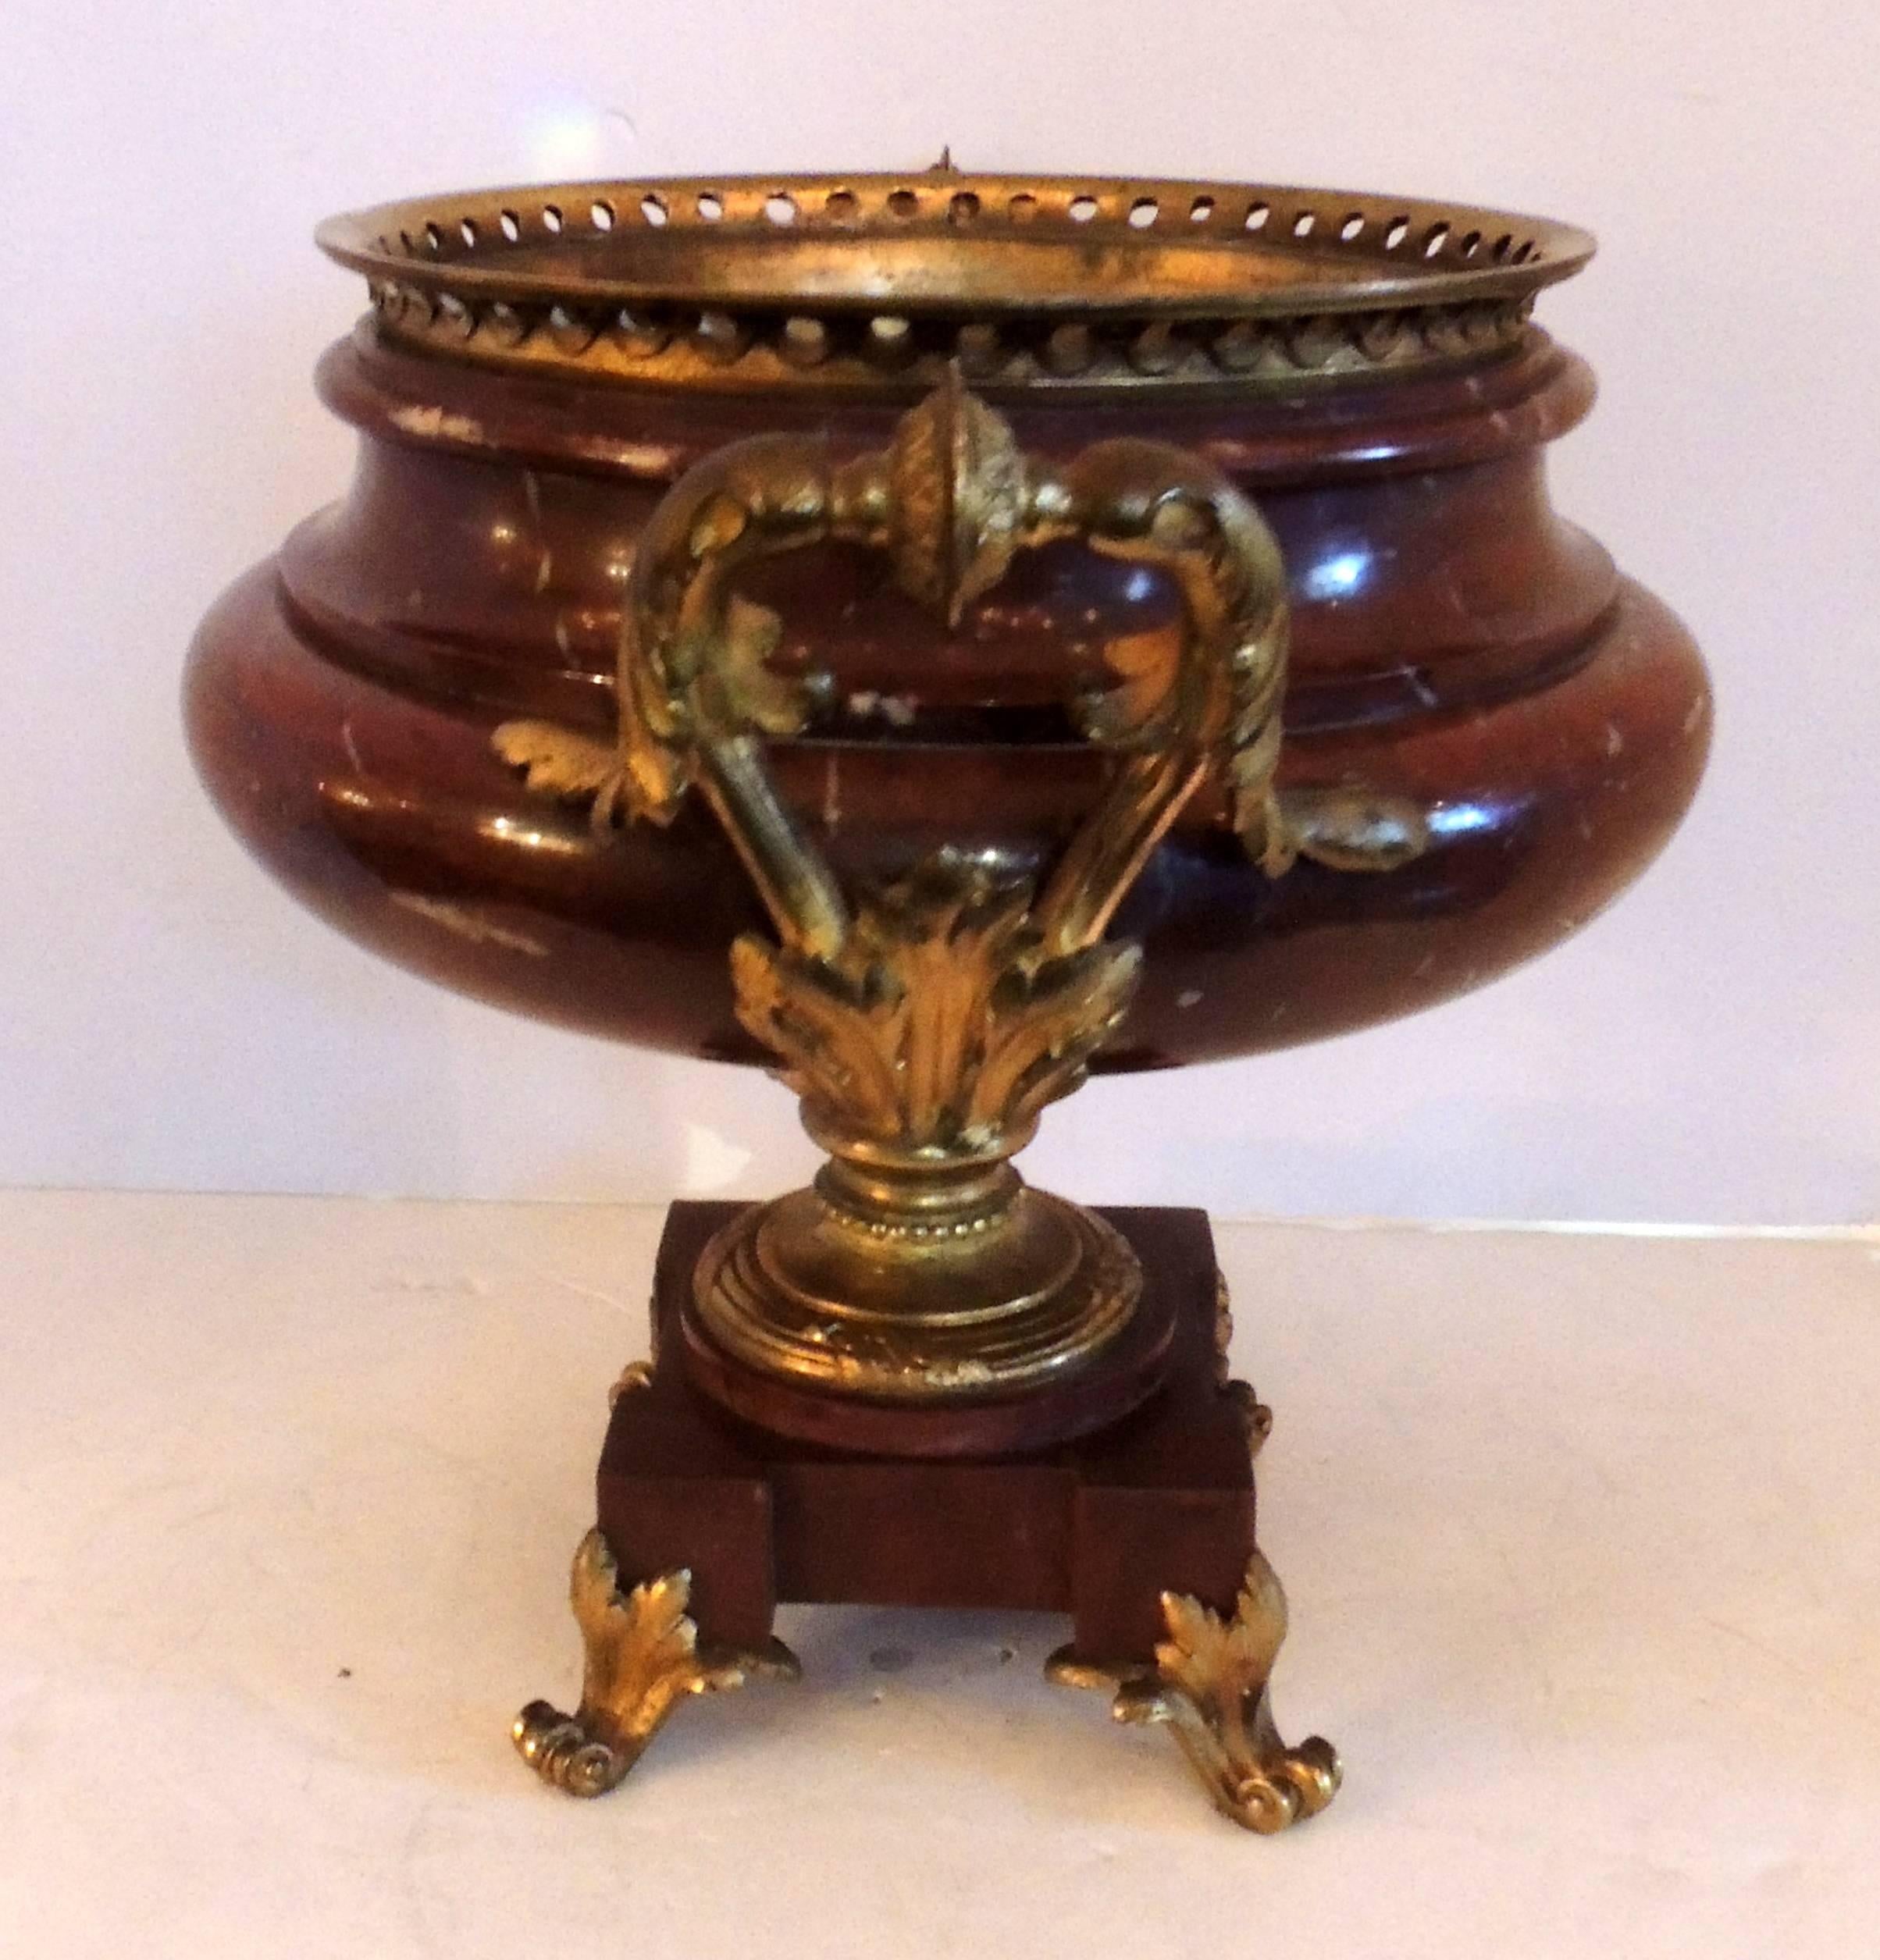 Early 20th Century Extraordinary Antique Rouge Marble Gilt Dore Bronze Ormolu-Mounted Centrepiece